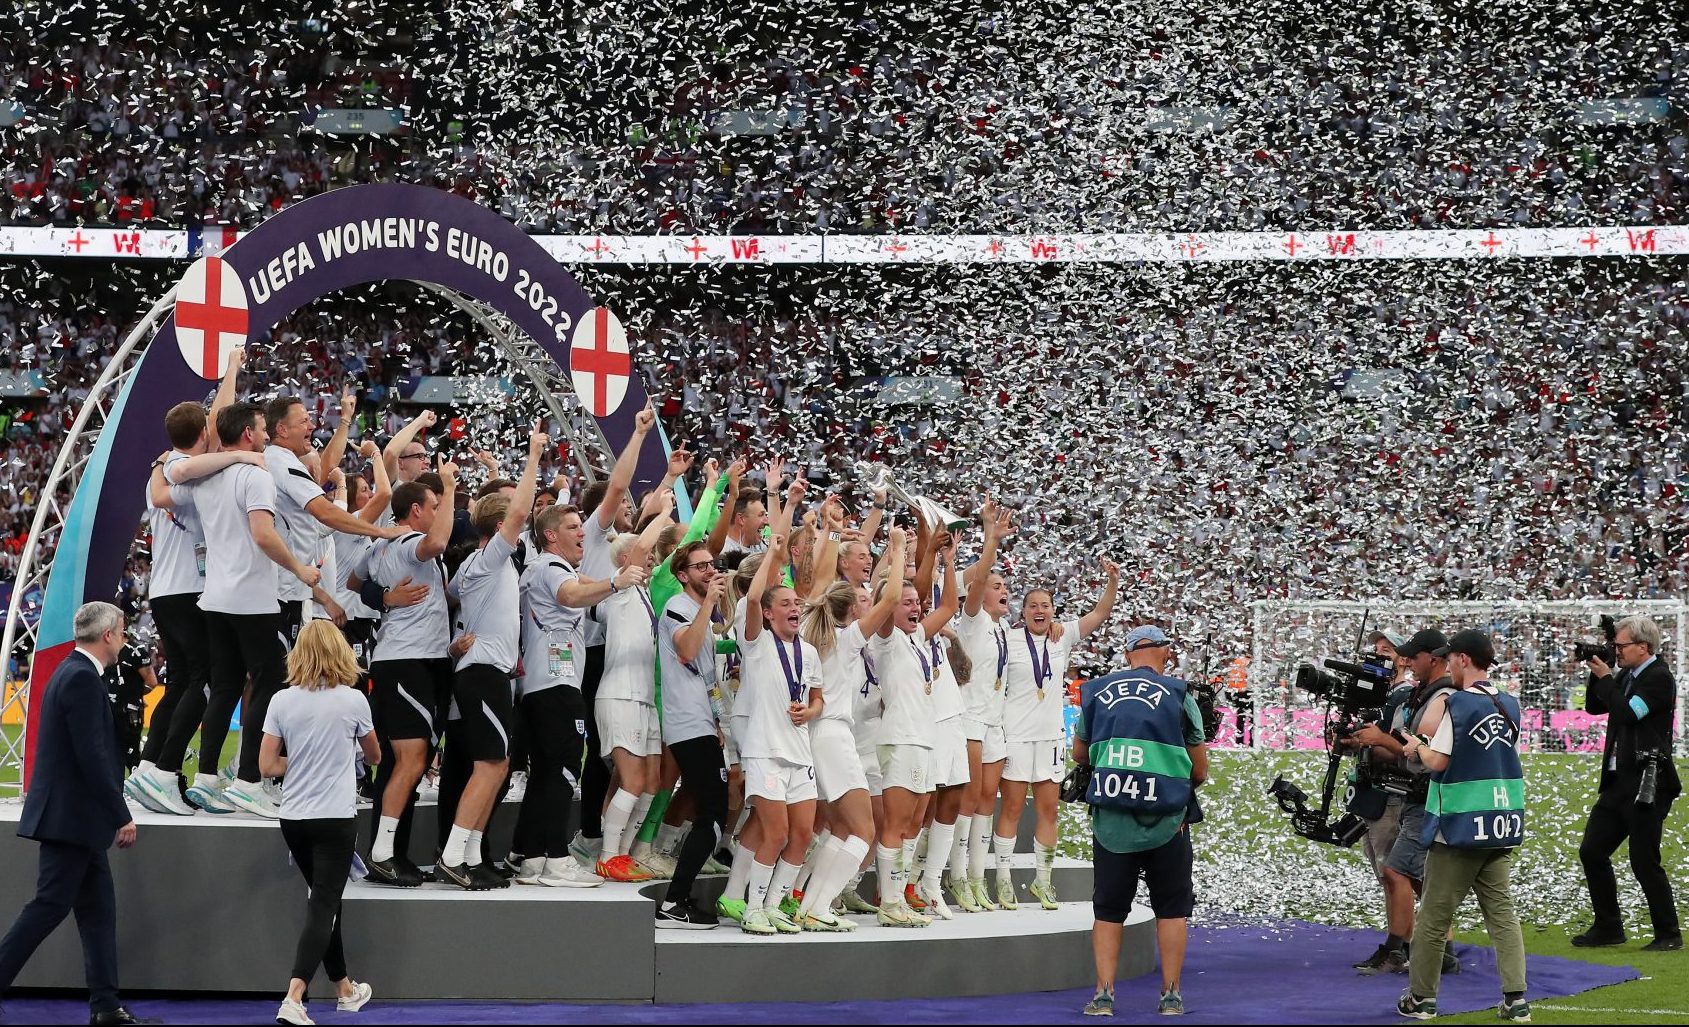 Hublot Expands Its Support For World Football As Official Timekeeper For  UEFA Women's Euro Championship